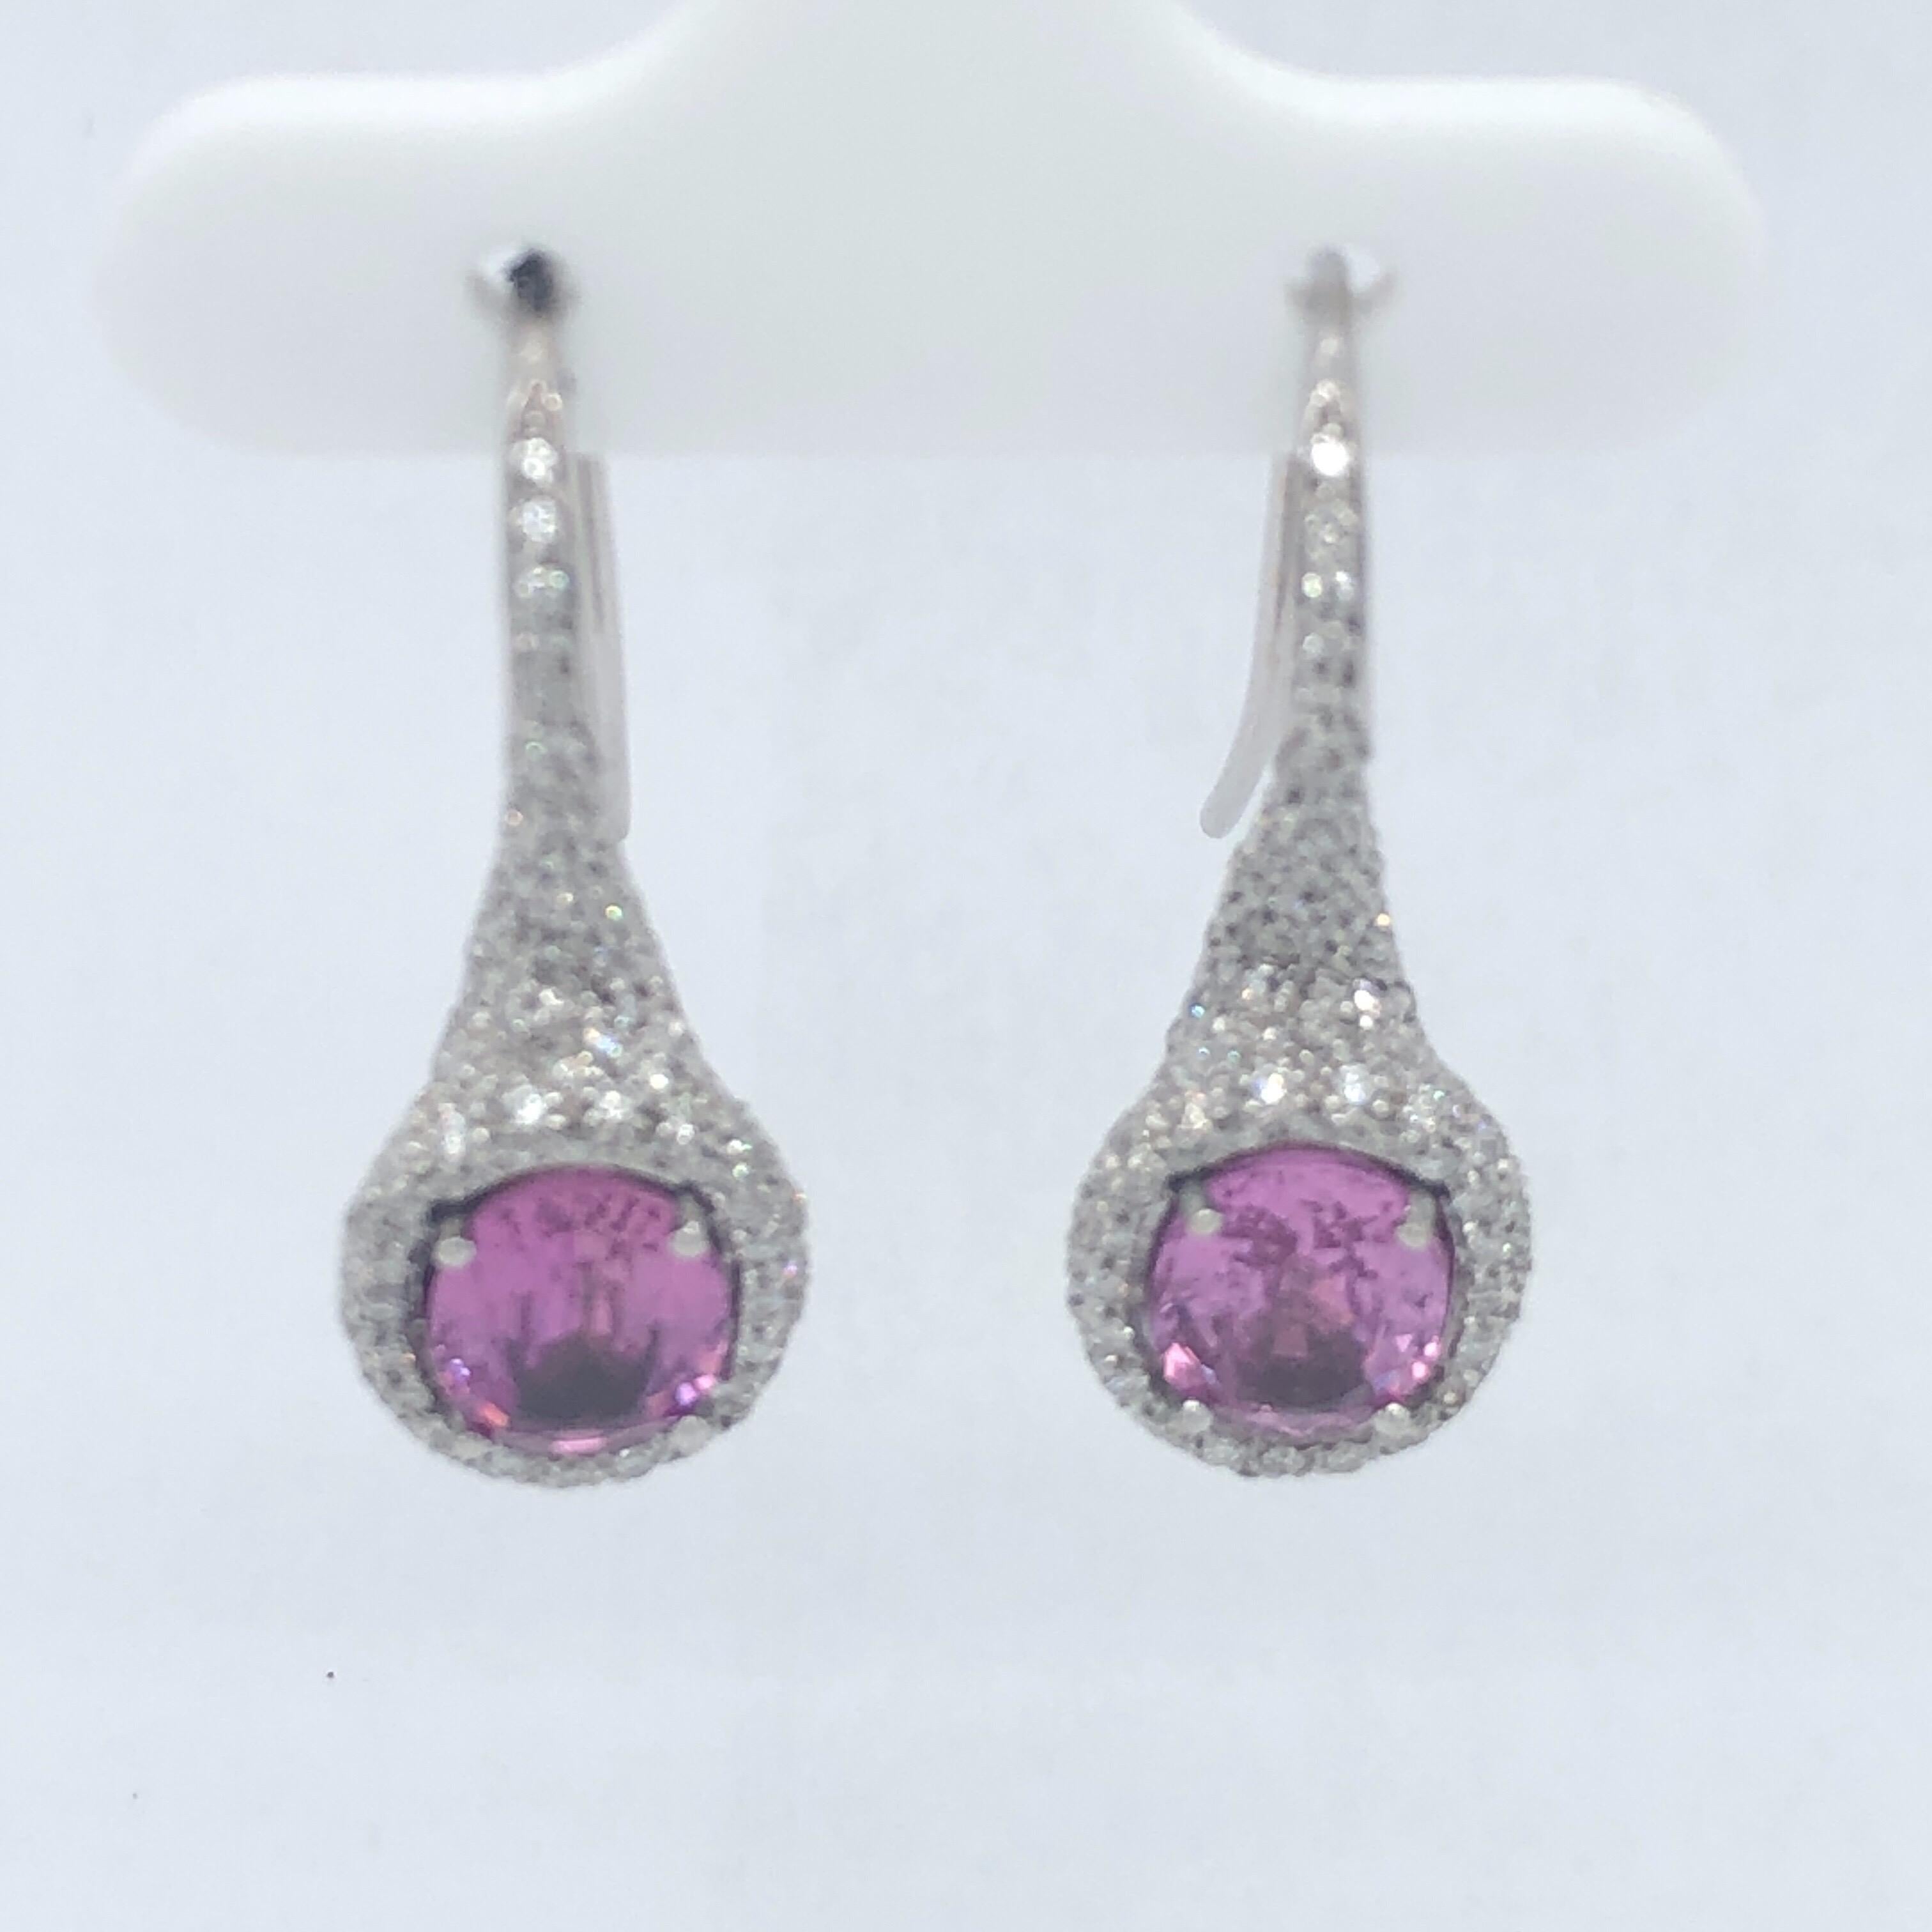 Stunning 18K White Gold Diamond and Pink Sapphire Earrings from World Renowned Designer, Chantelcer.  Stamped Chantecler and 750.  
